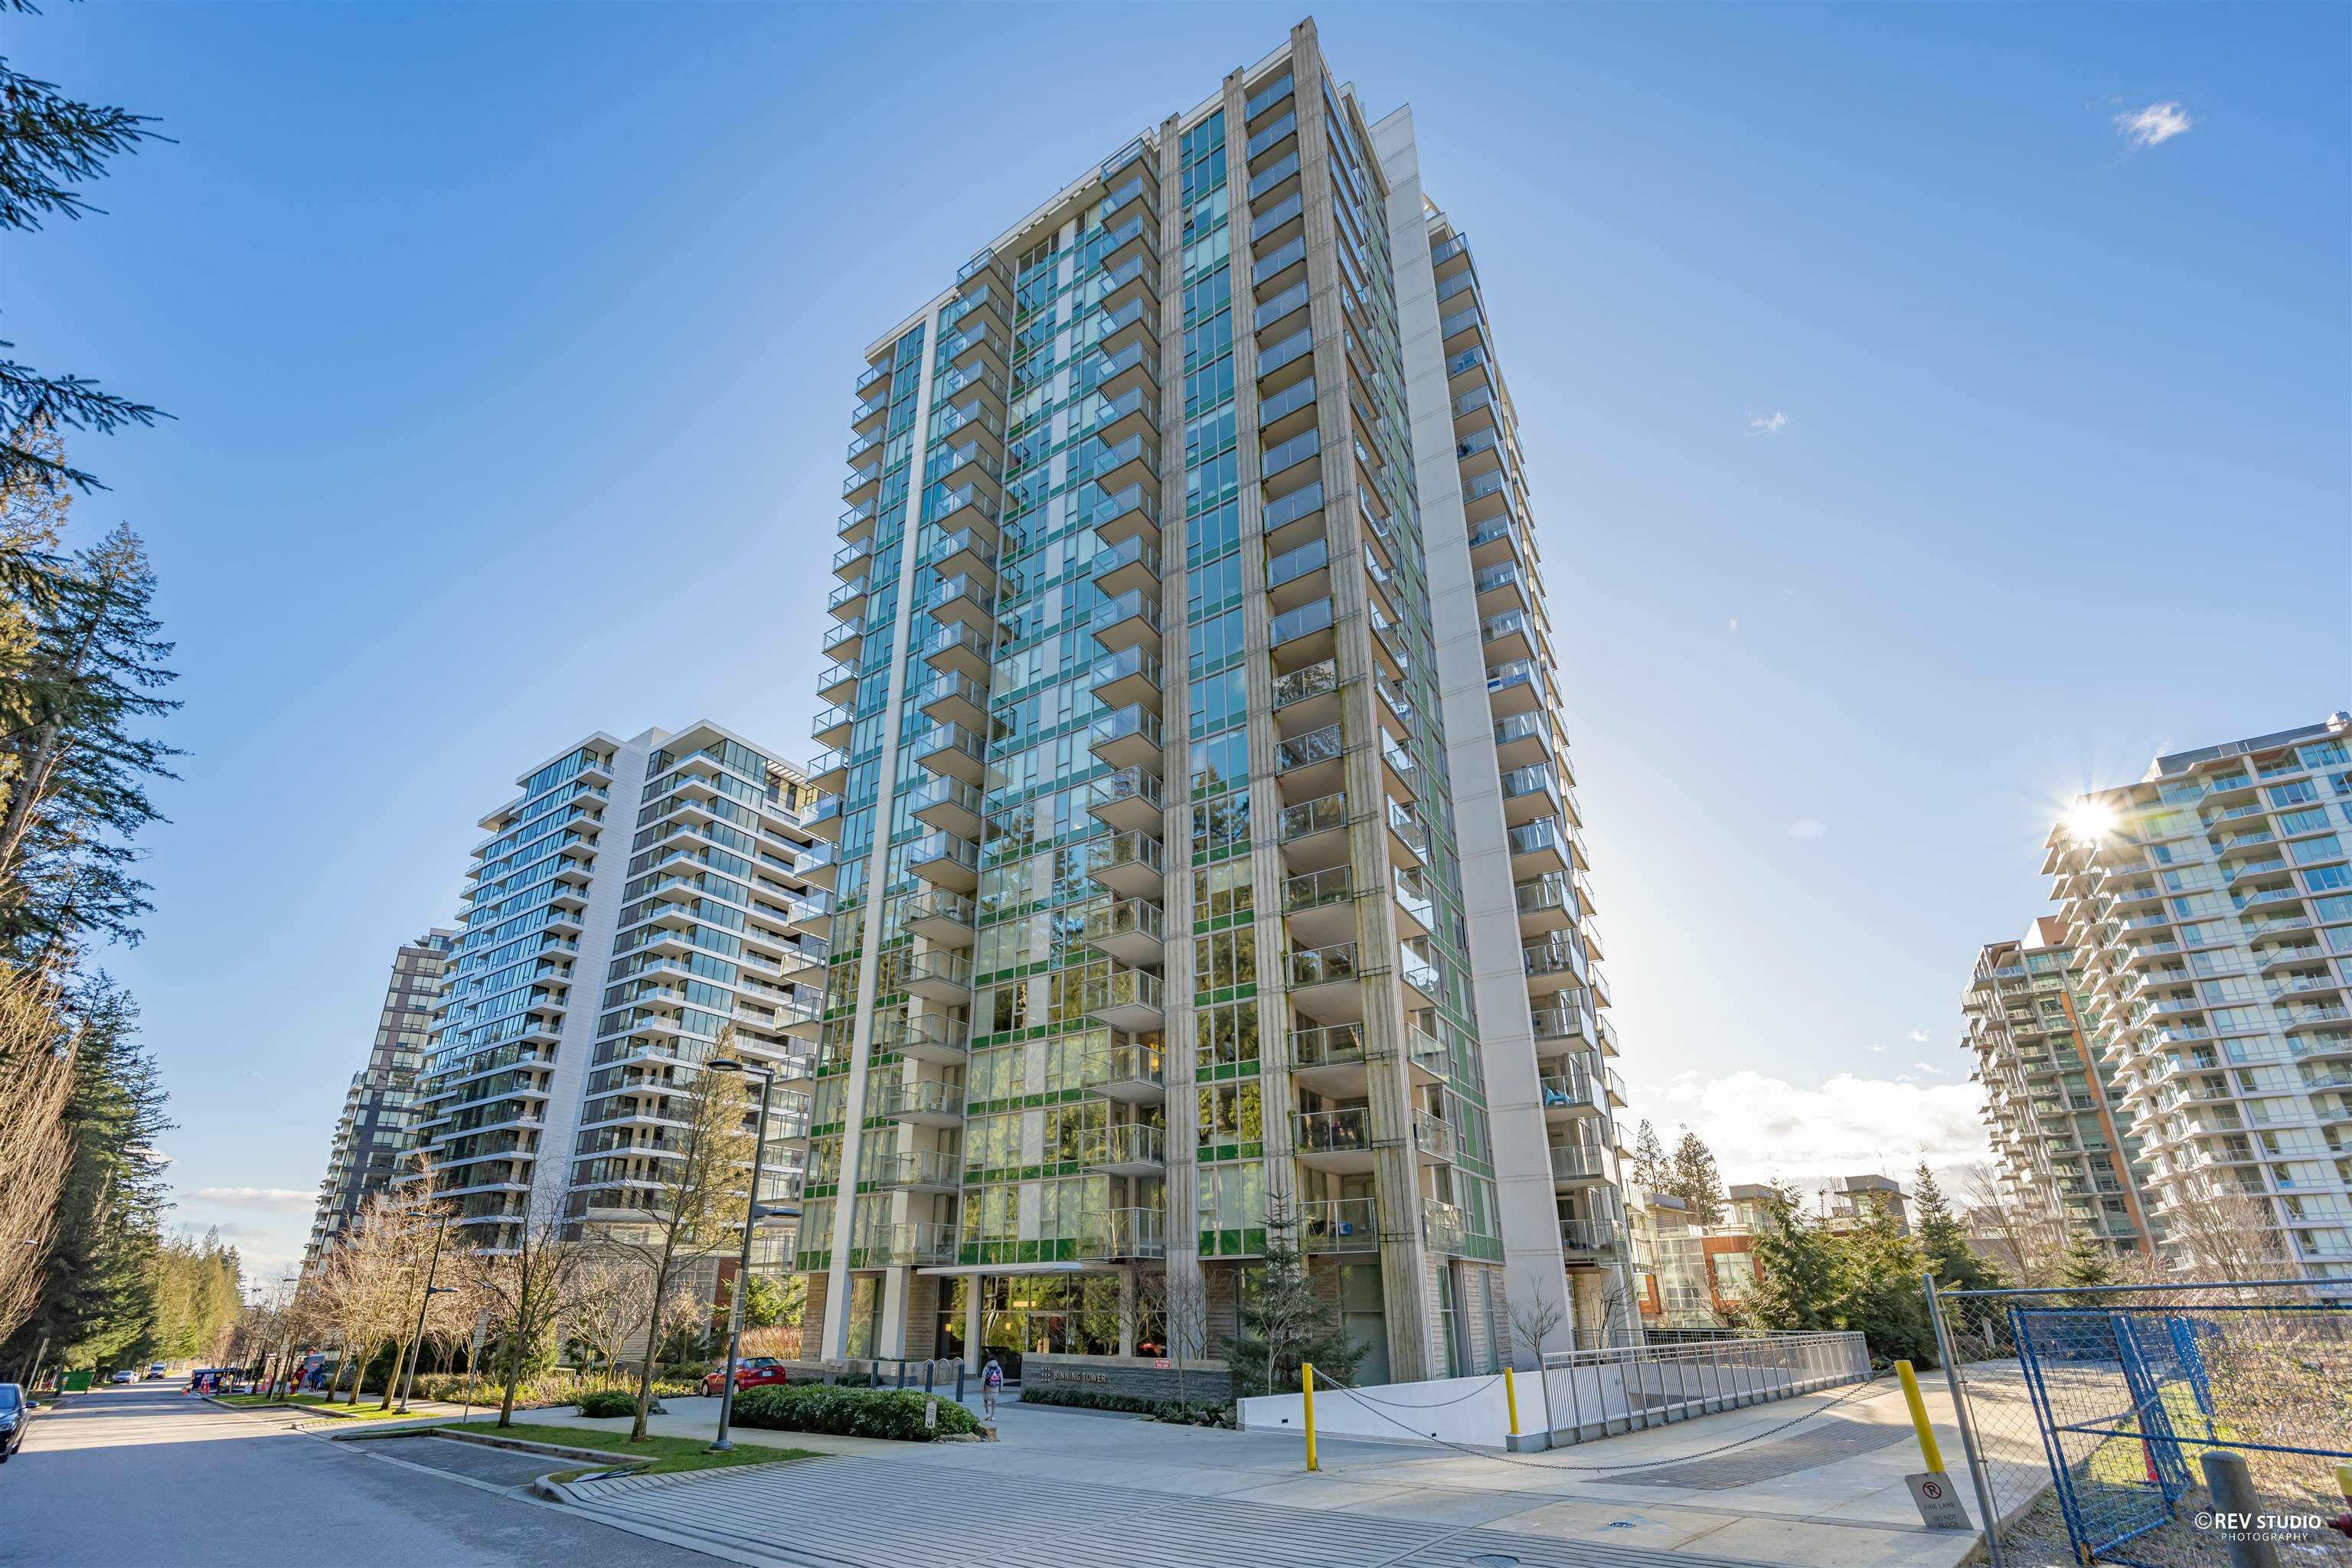 New property listed in University VW, Vancouver West